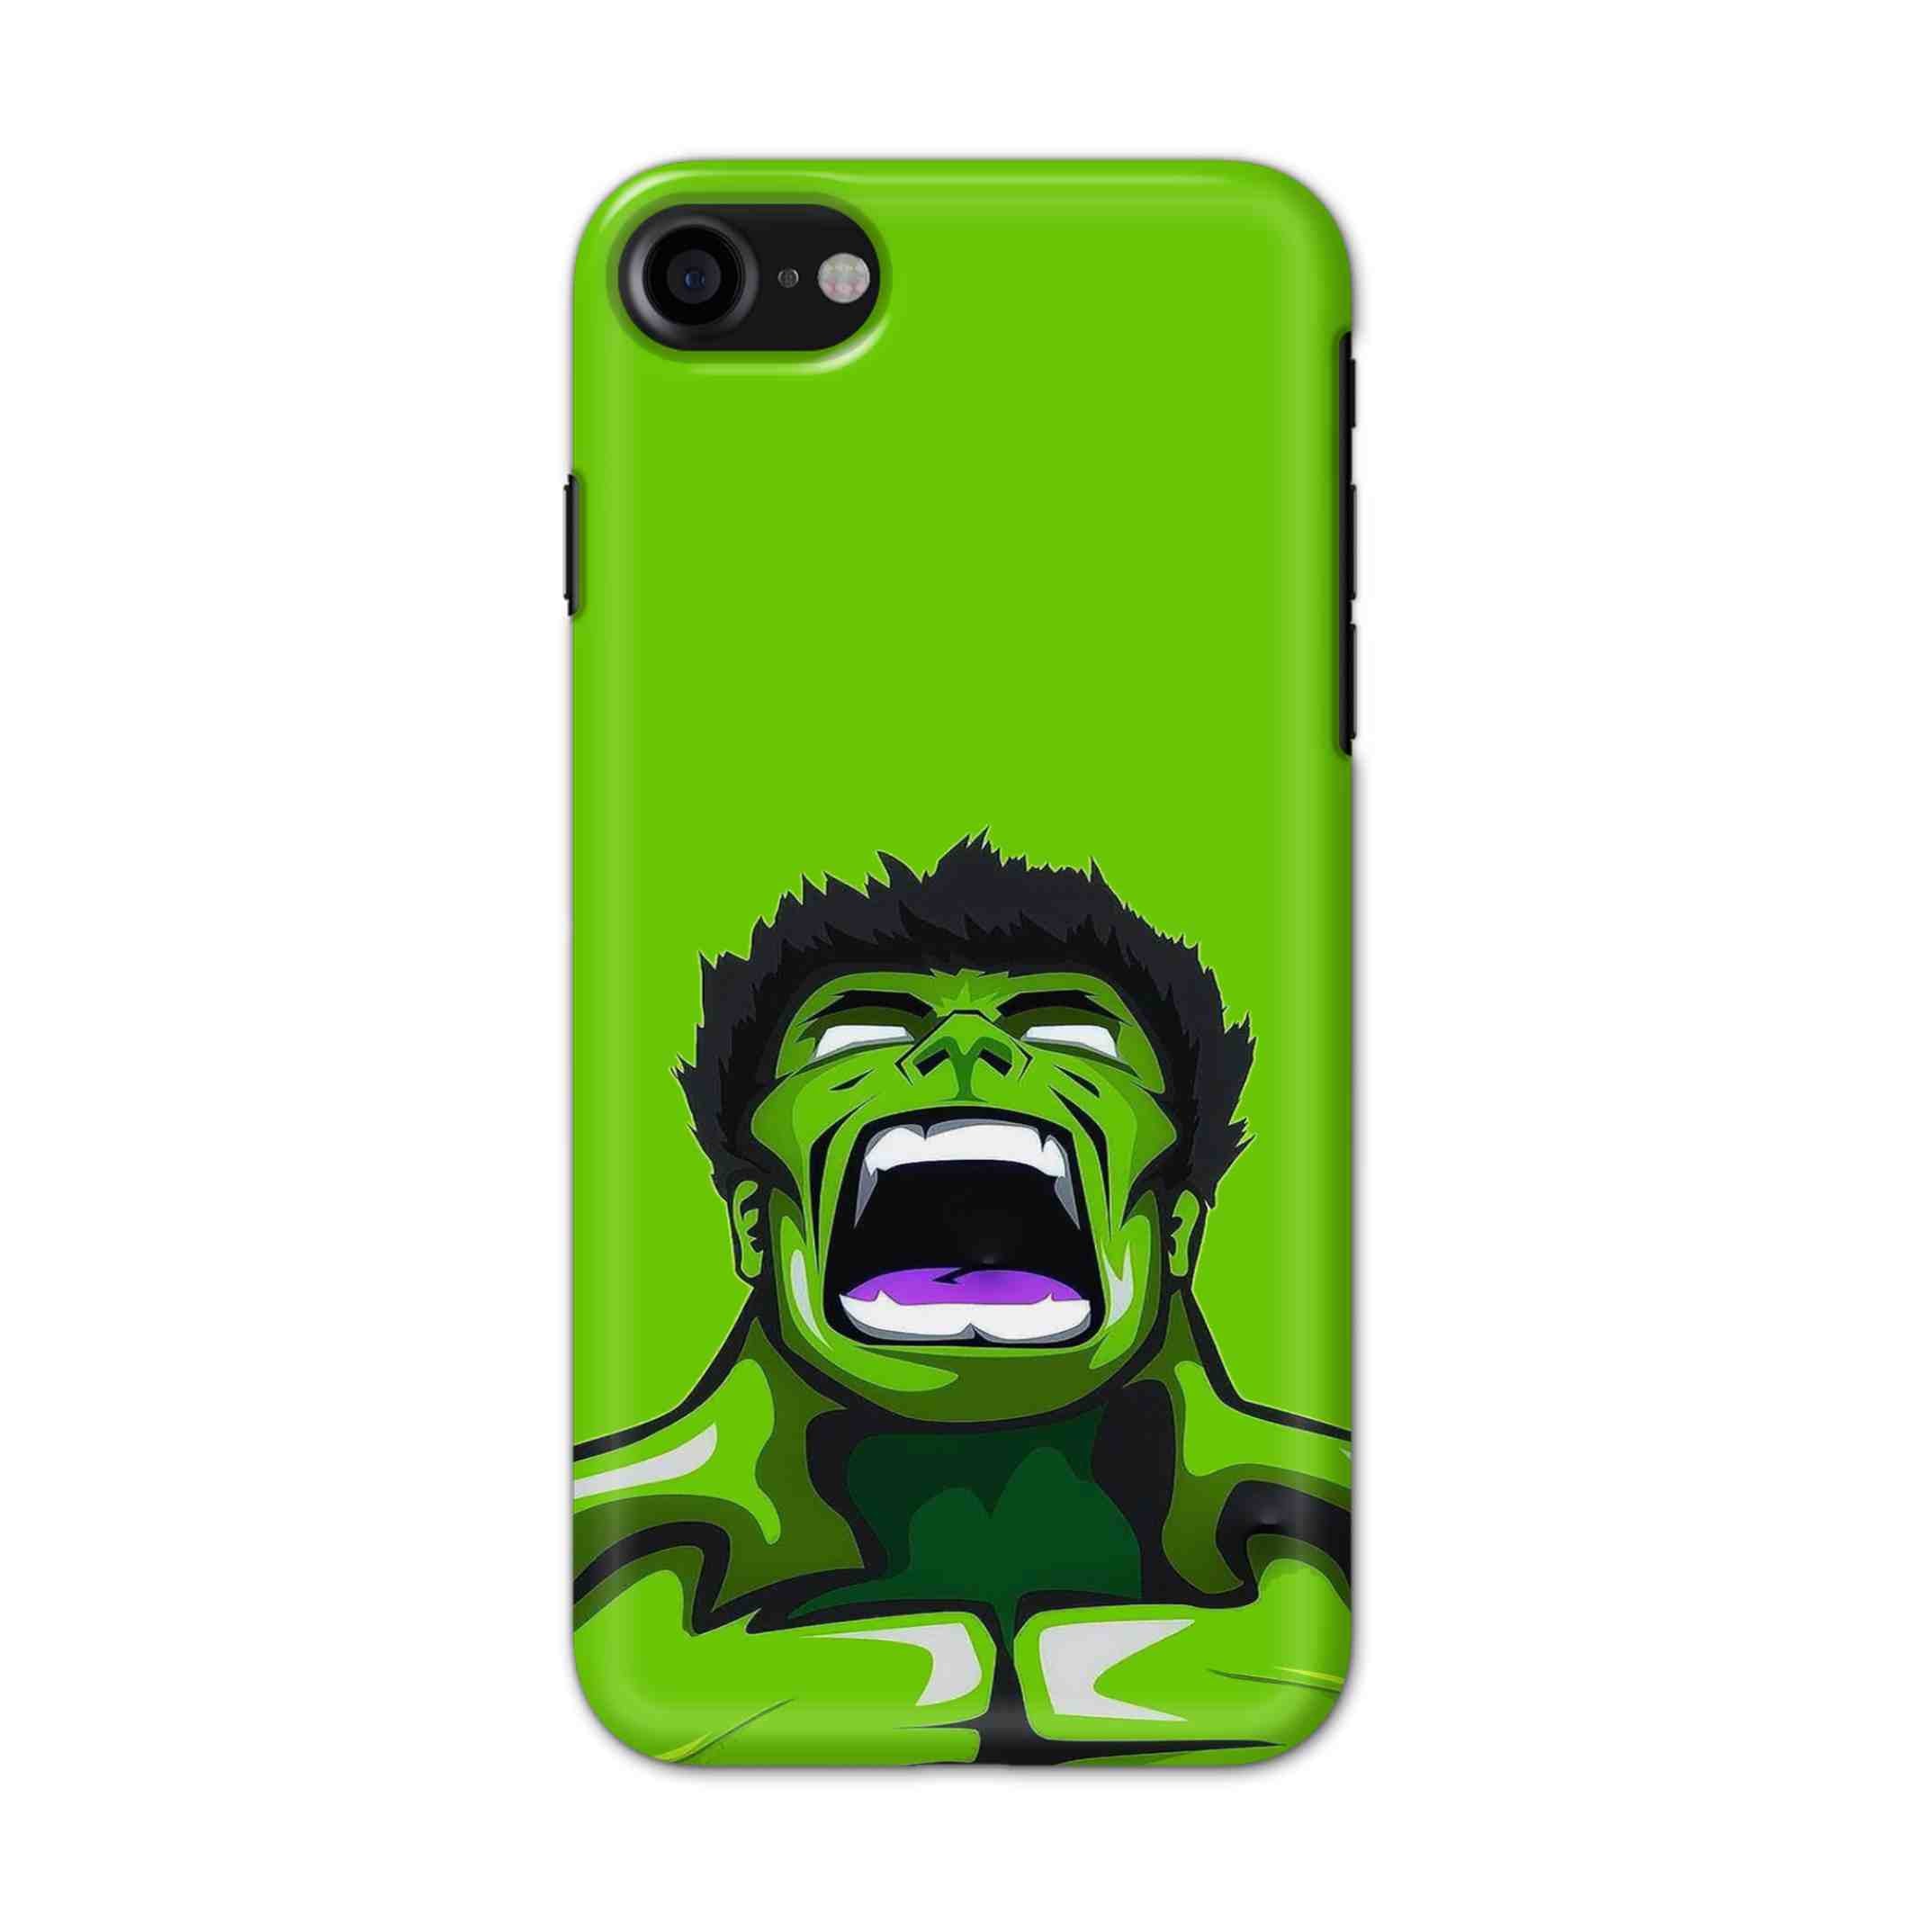 Buy Green Hulk Hard Back Mobile Phone Case/Cover For iPhone 7 / 8 Online